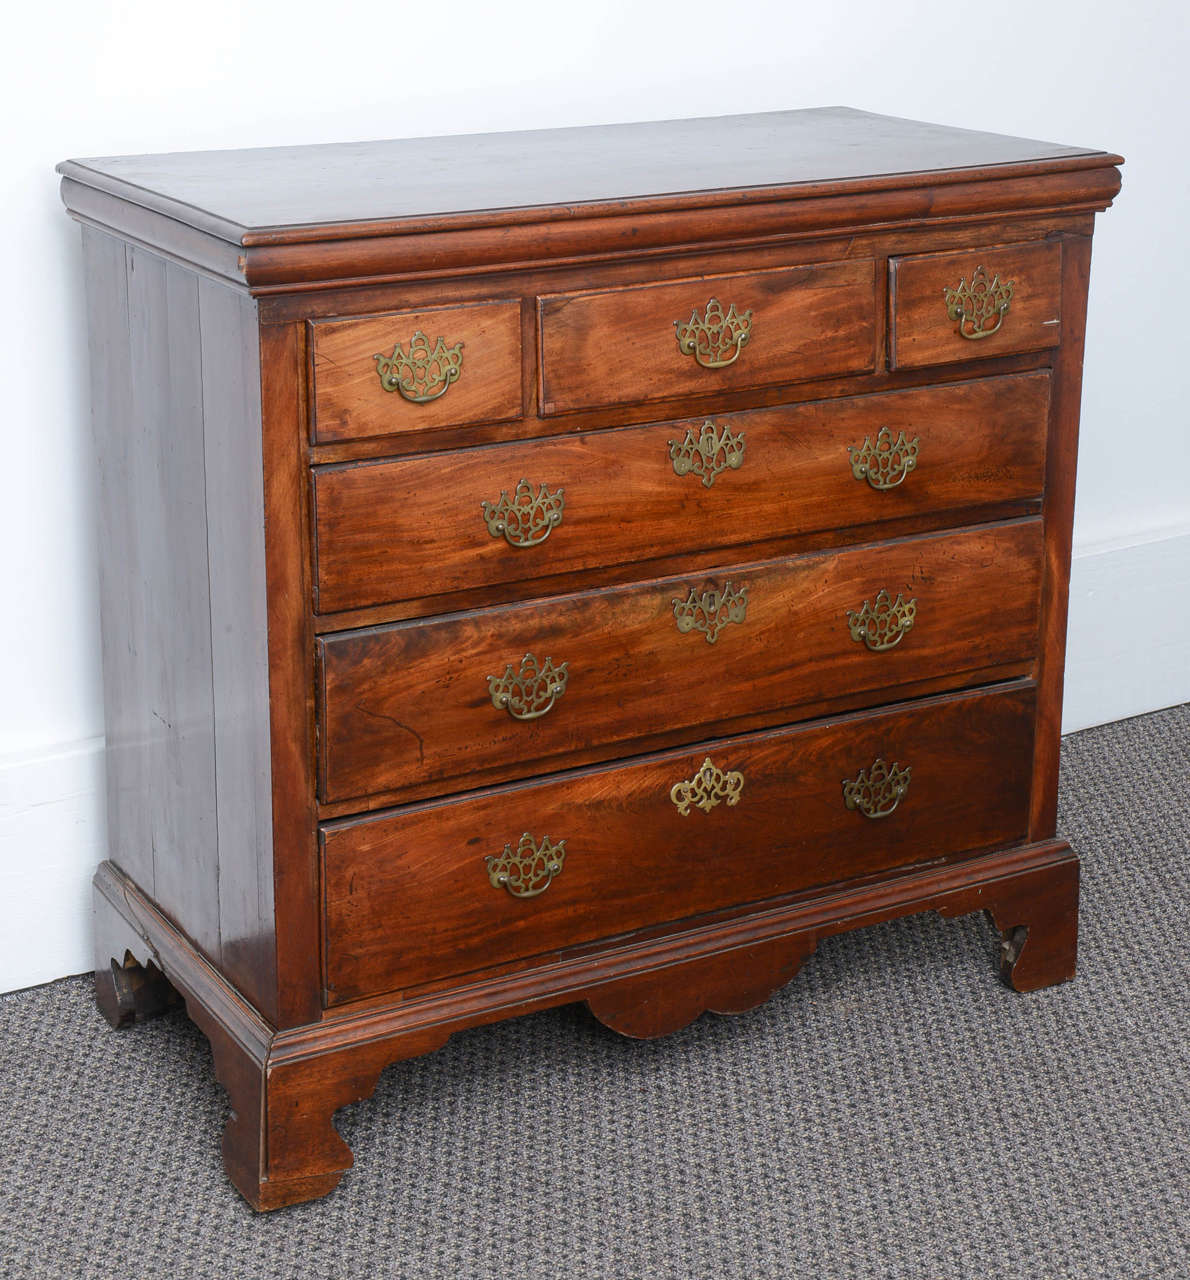 Very nice solid mahogany American chest of drawers. It sits on bracket feet the drawer linings are solid oak with dovetail joints. It's a very nice rich mahogany color.